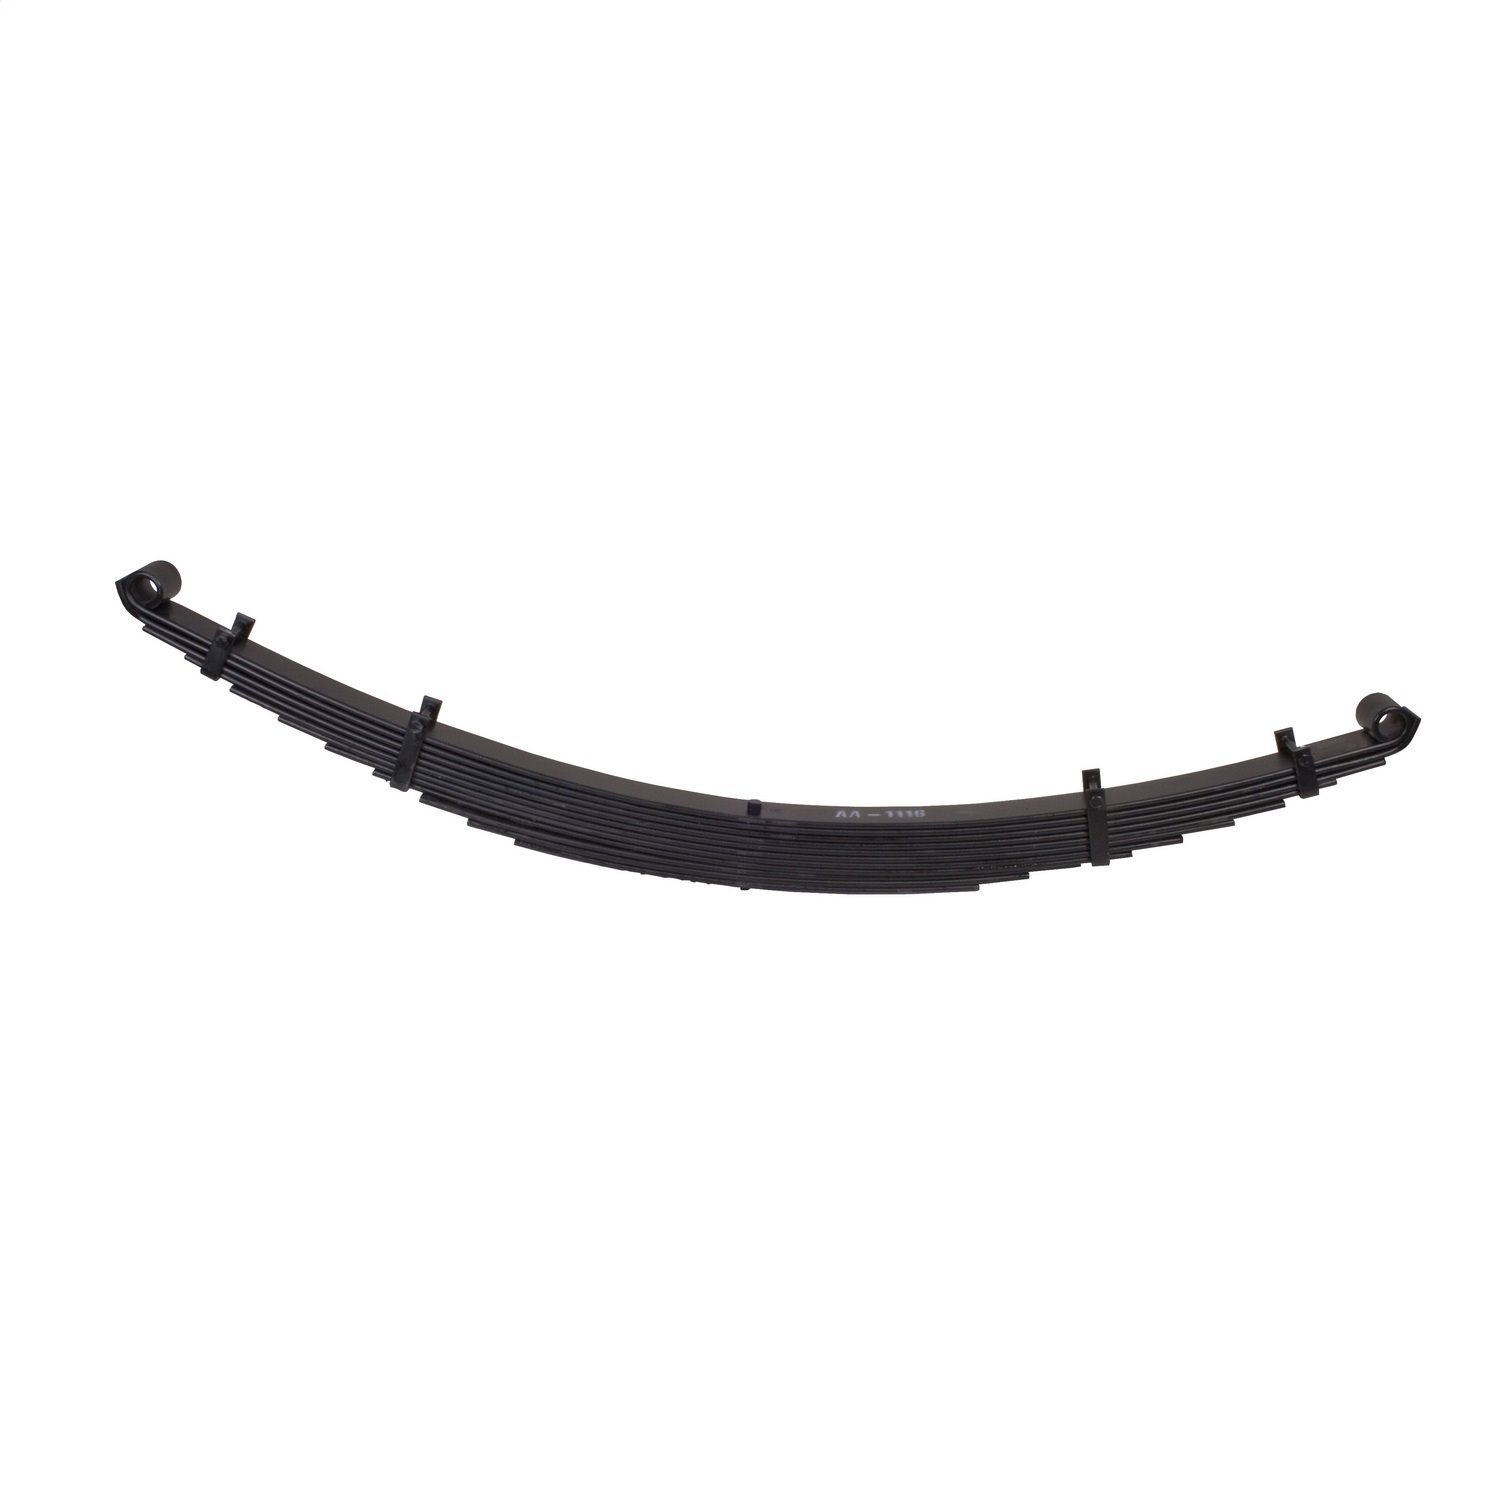 Replacement rear leaf spring from Omix-ADA has11 leaves. It, Fits48-63 Willys trucks.